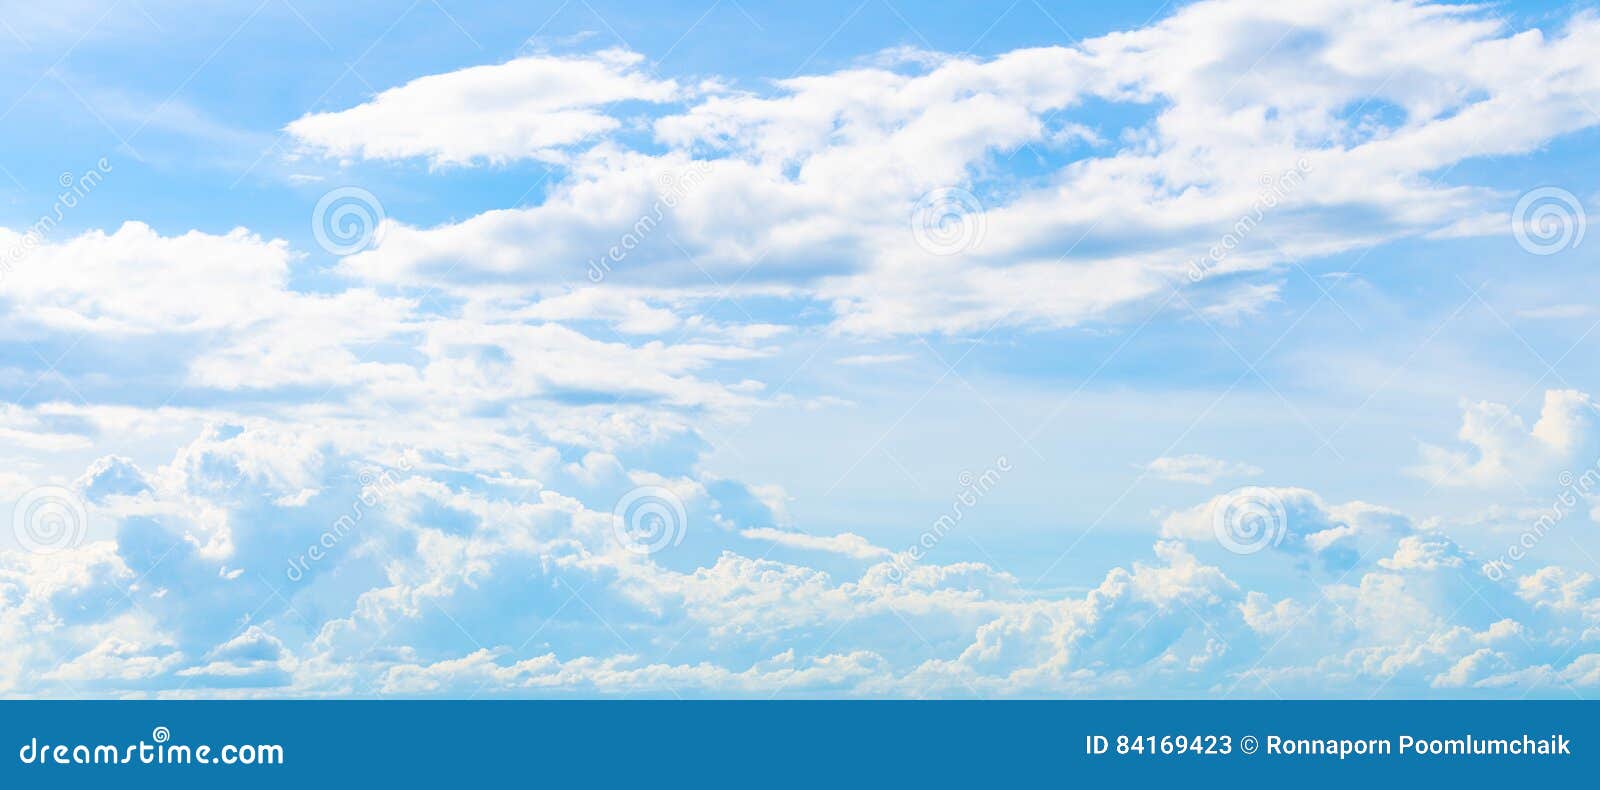 sky with clouds,blue skies, white clouds